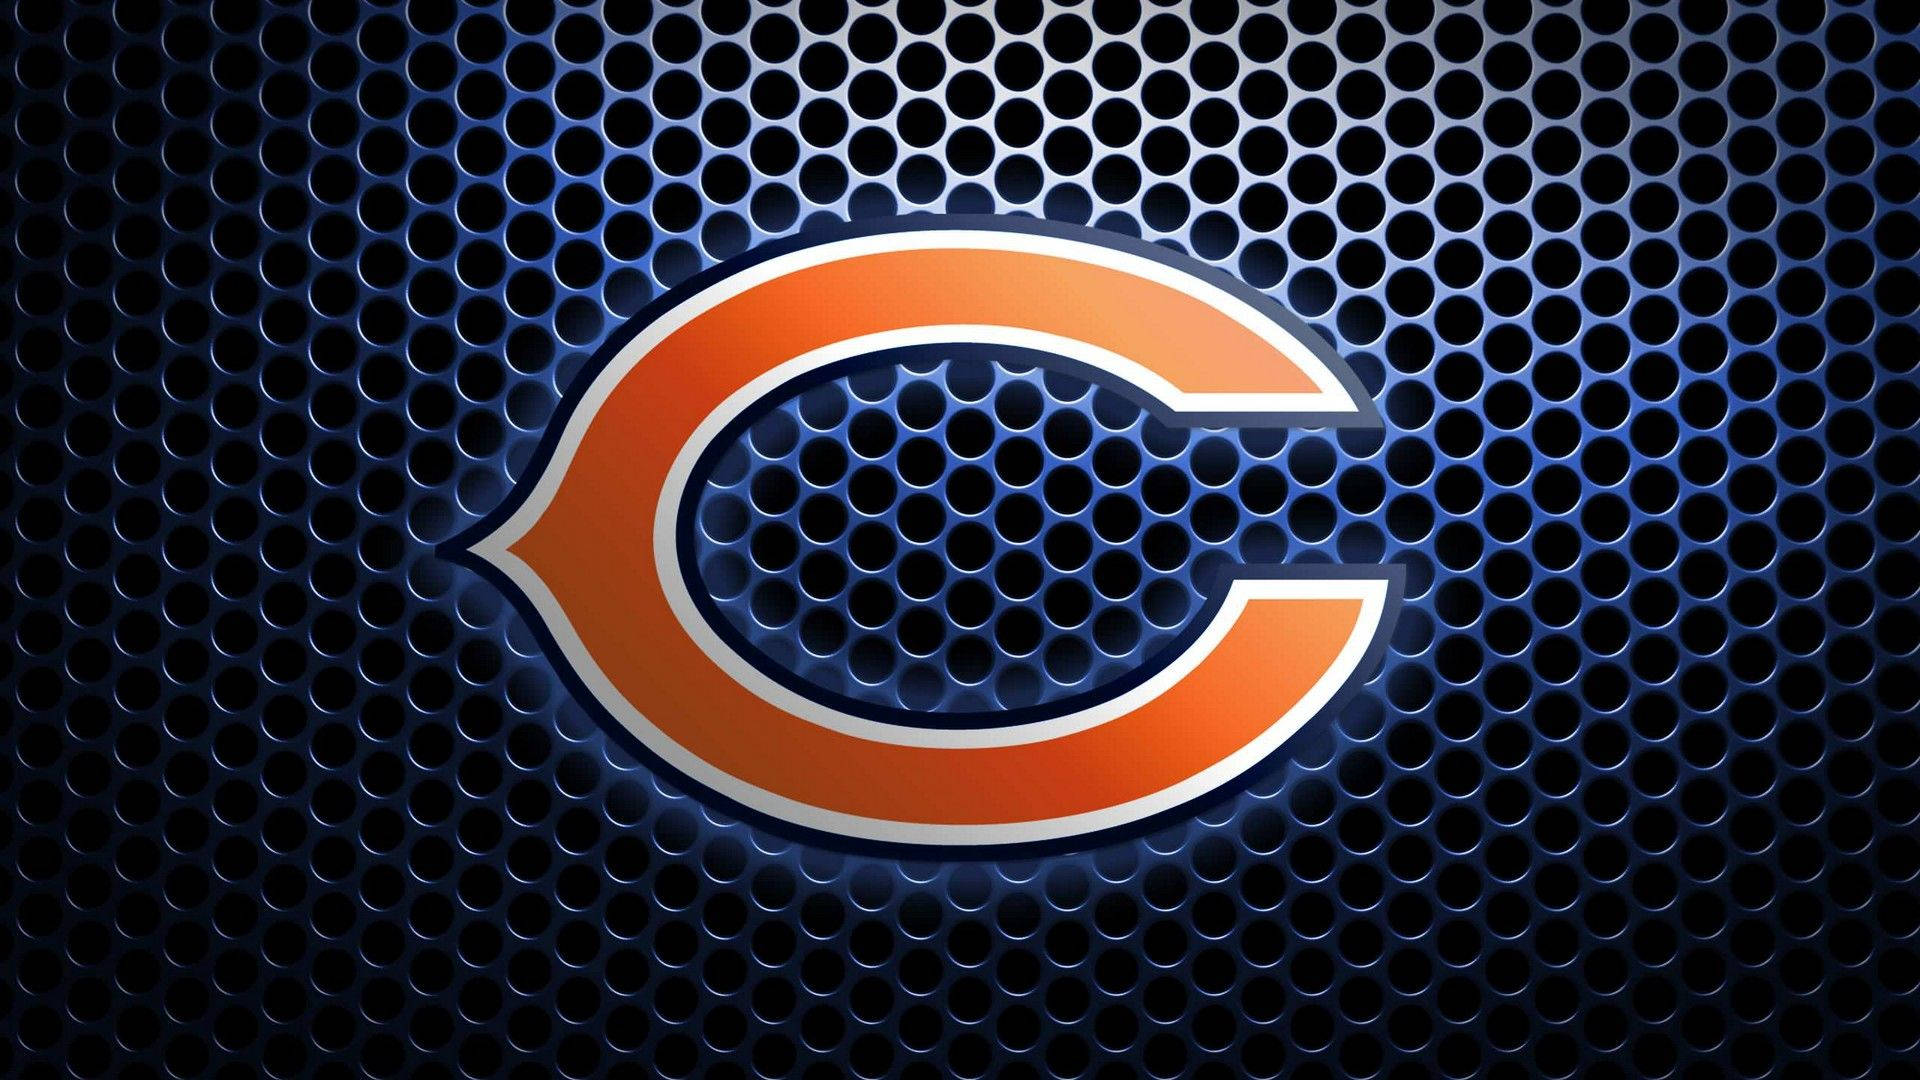 Touchdown Victory for the Chicago Bears Wallpaper